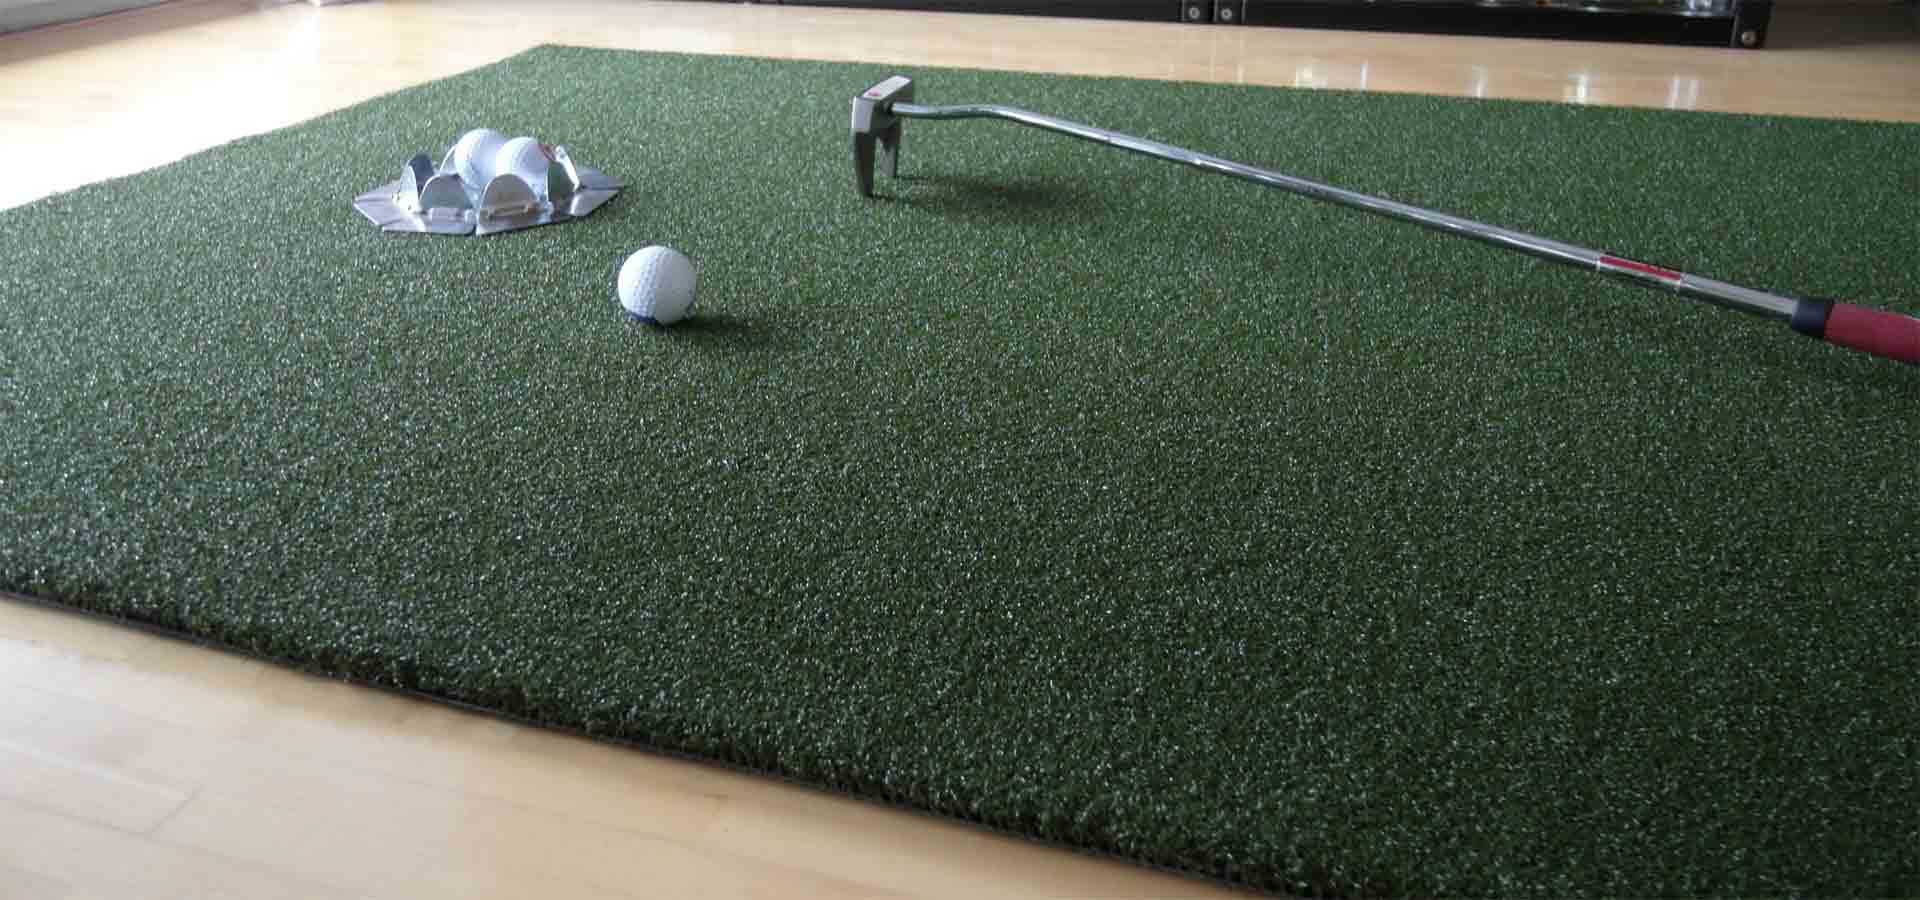 mobiles-putting-green-1